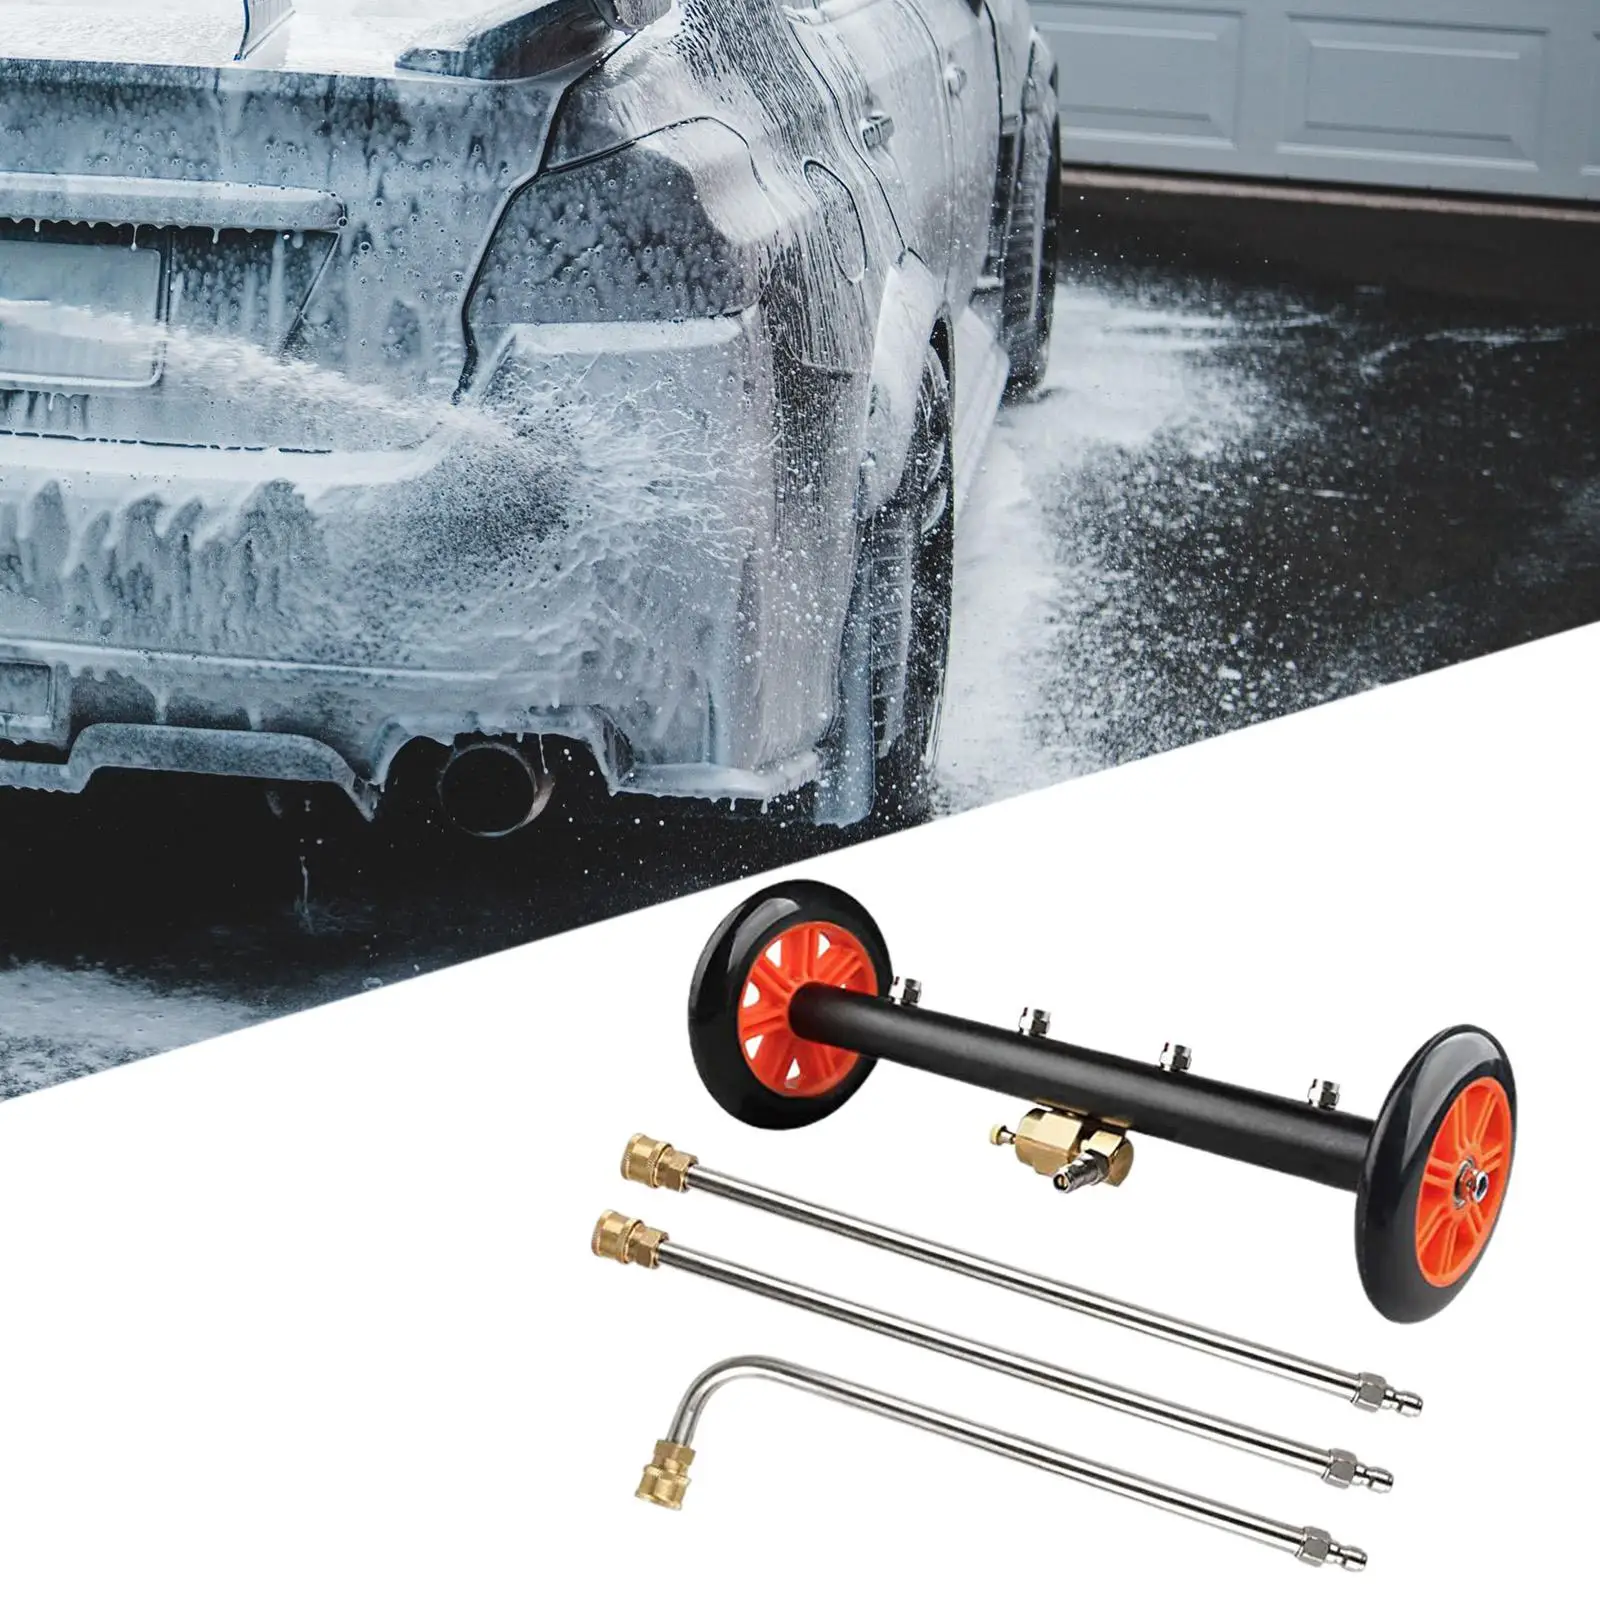 Dual Purpose Power Washer Surface Cleaner Under Car Wash Undercarriage Pressure